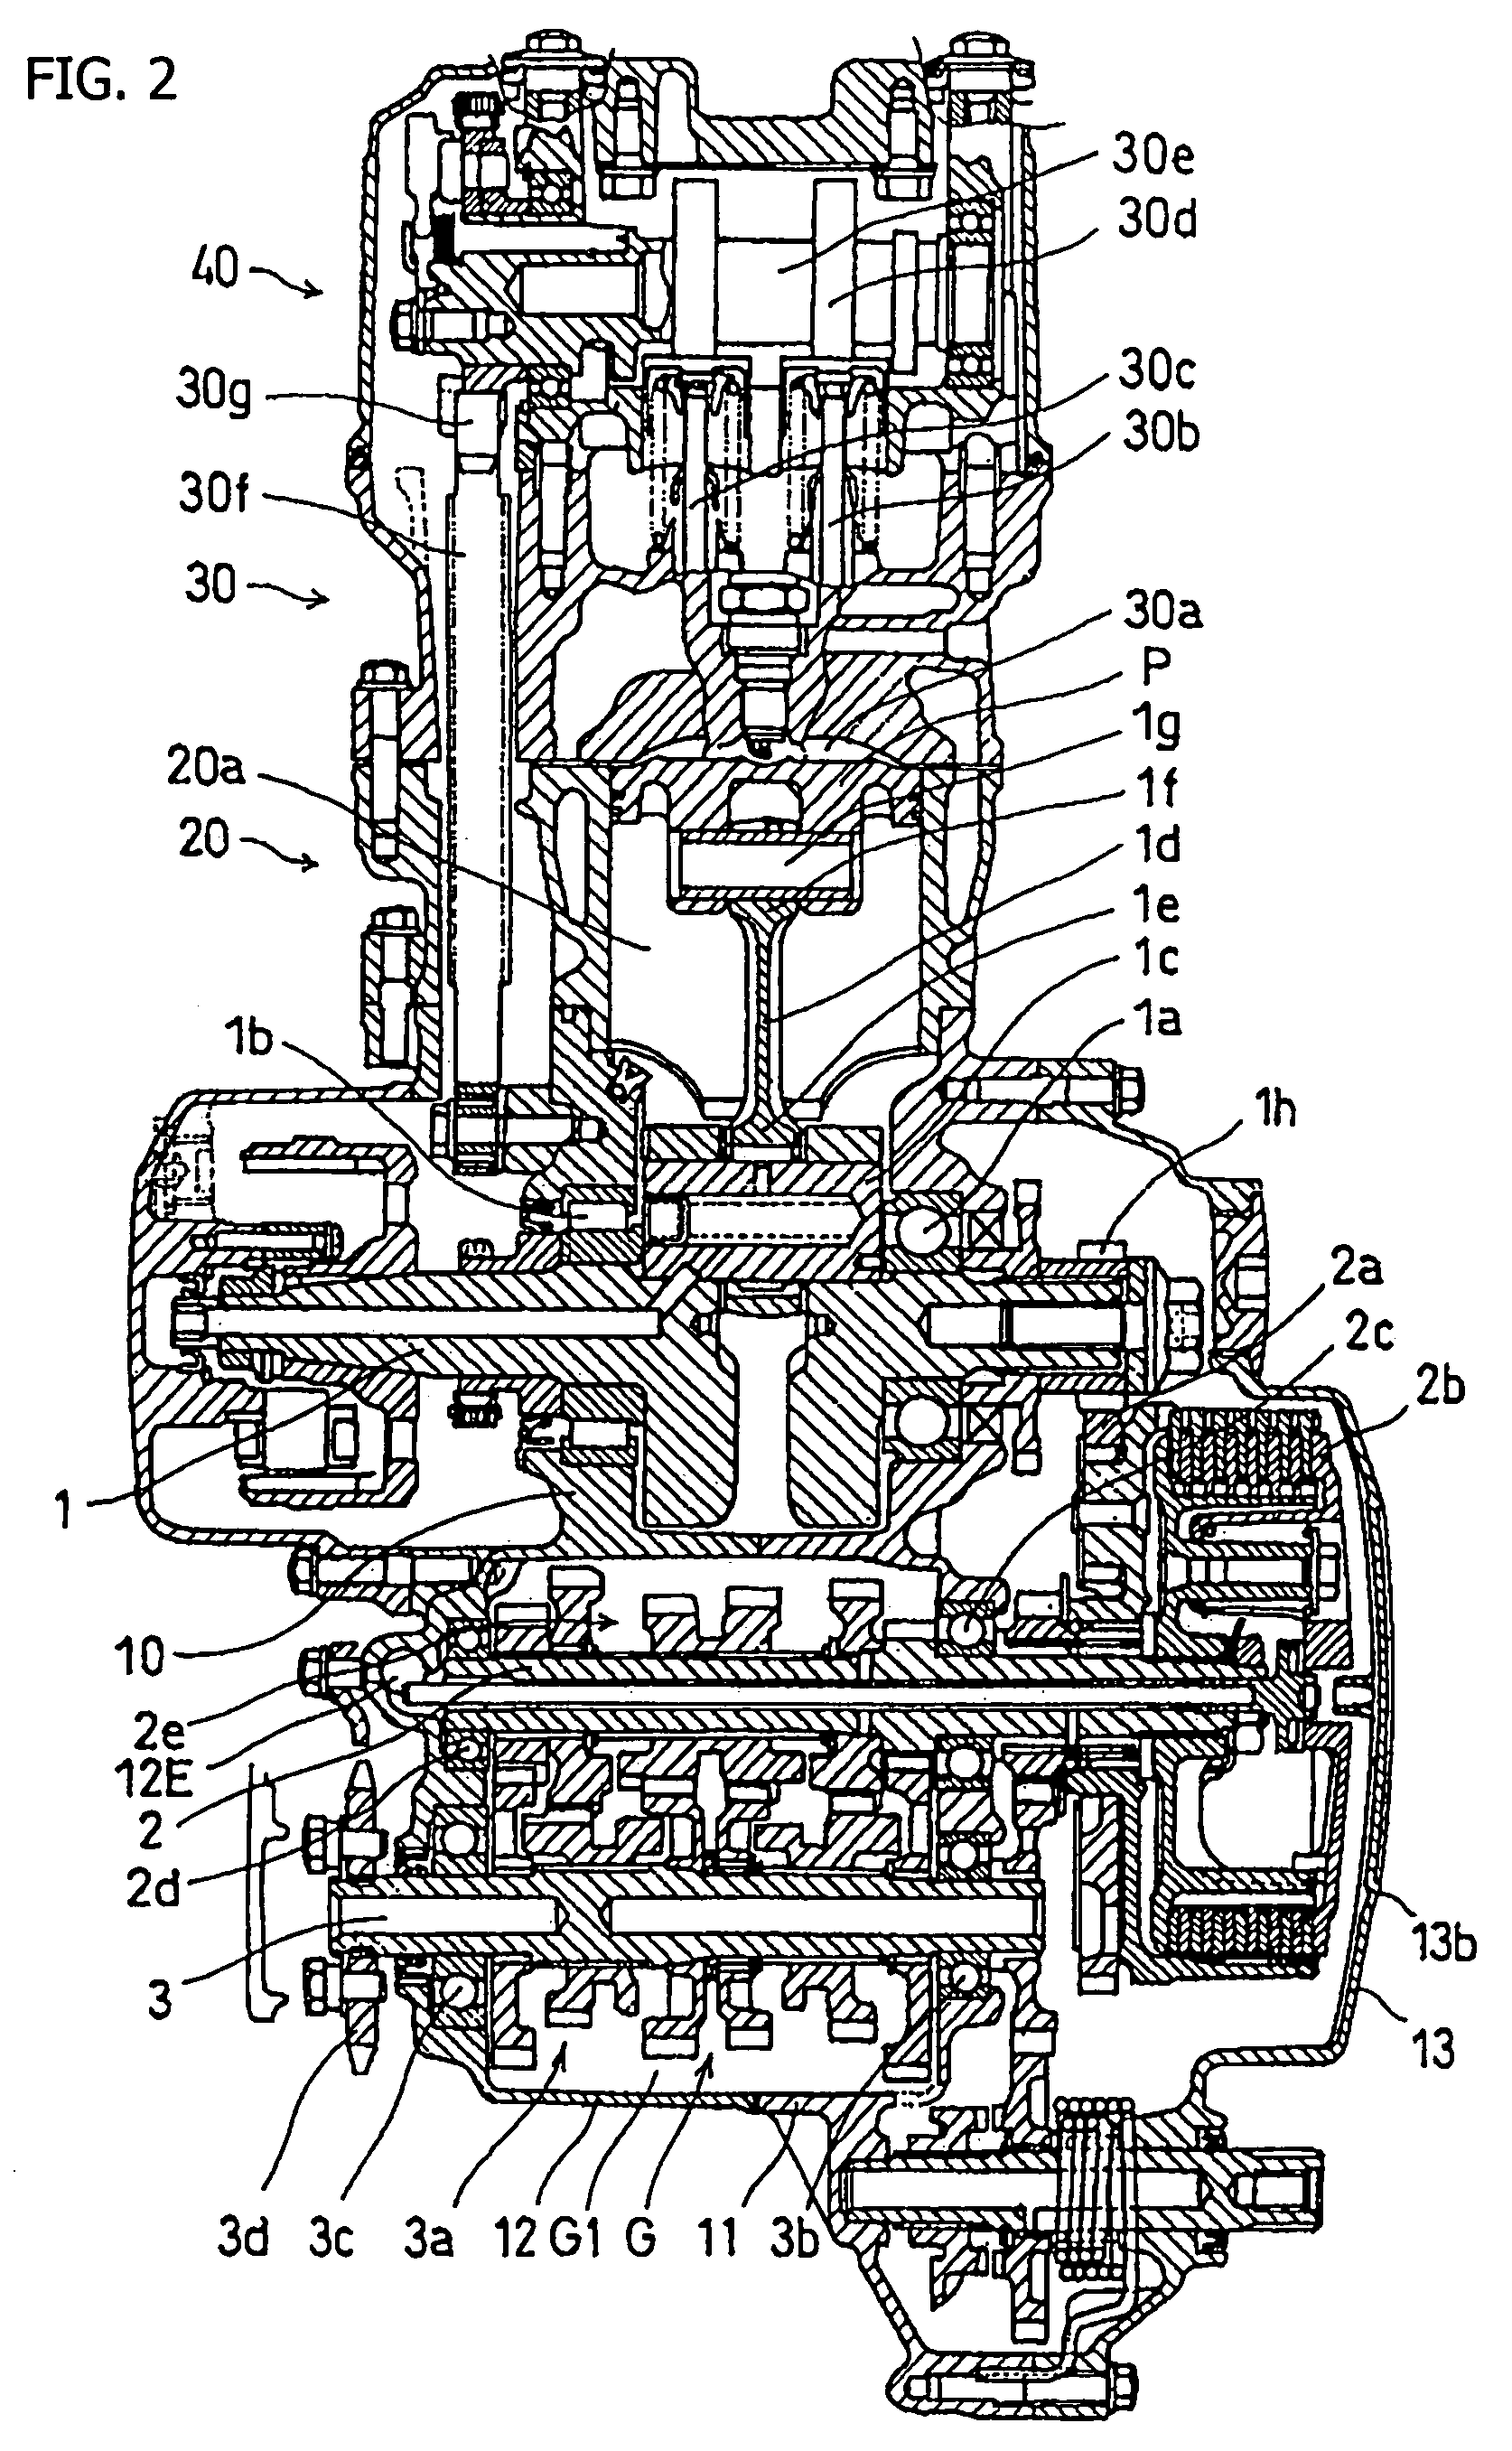 Lubrication system and method, and engine incorporating same